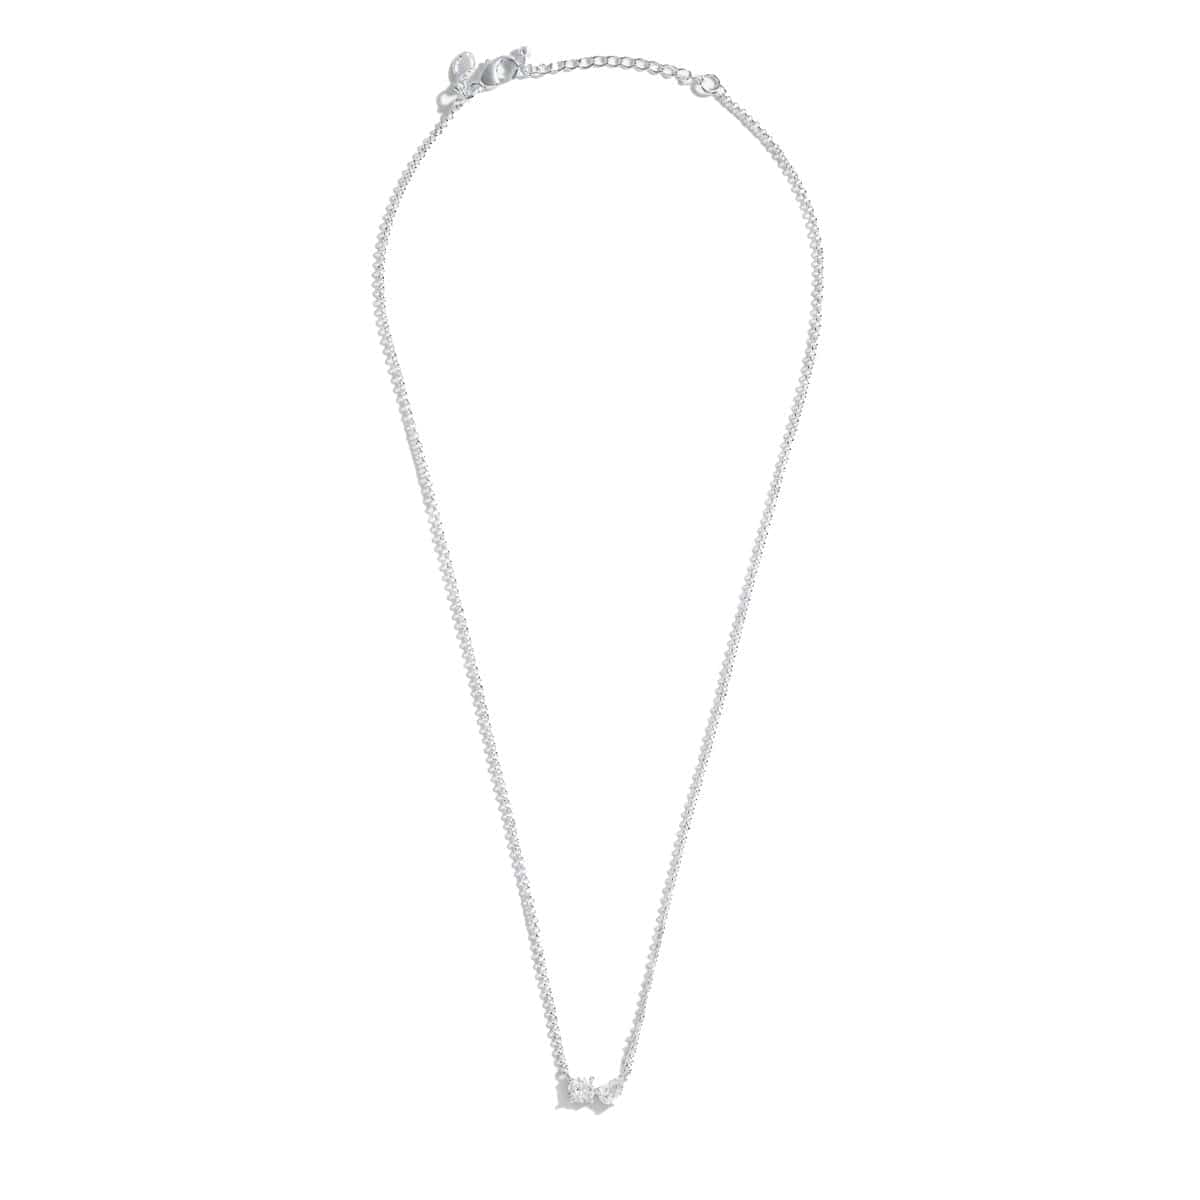 Joma Jewellery Necklace Joma Jewellery Love From Your Little Two Necklace